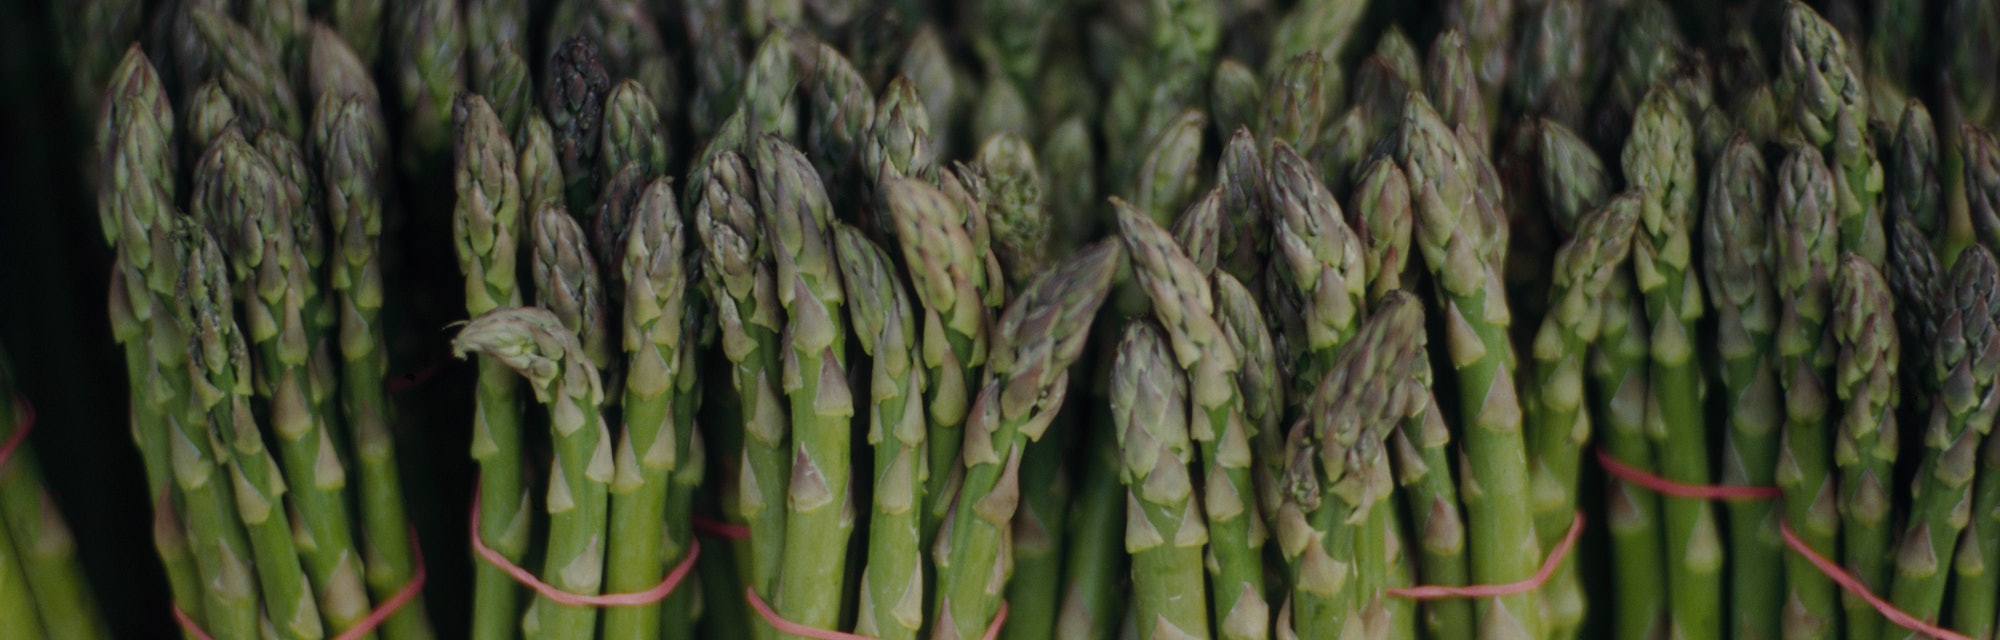 Shortly after chowing down on a healthy, asparagus-rich dinner, you might notice a striking and unpl...